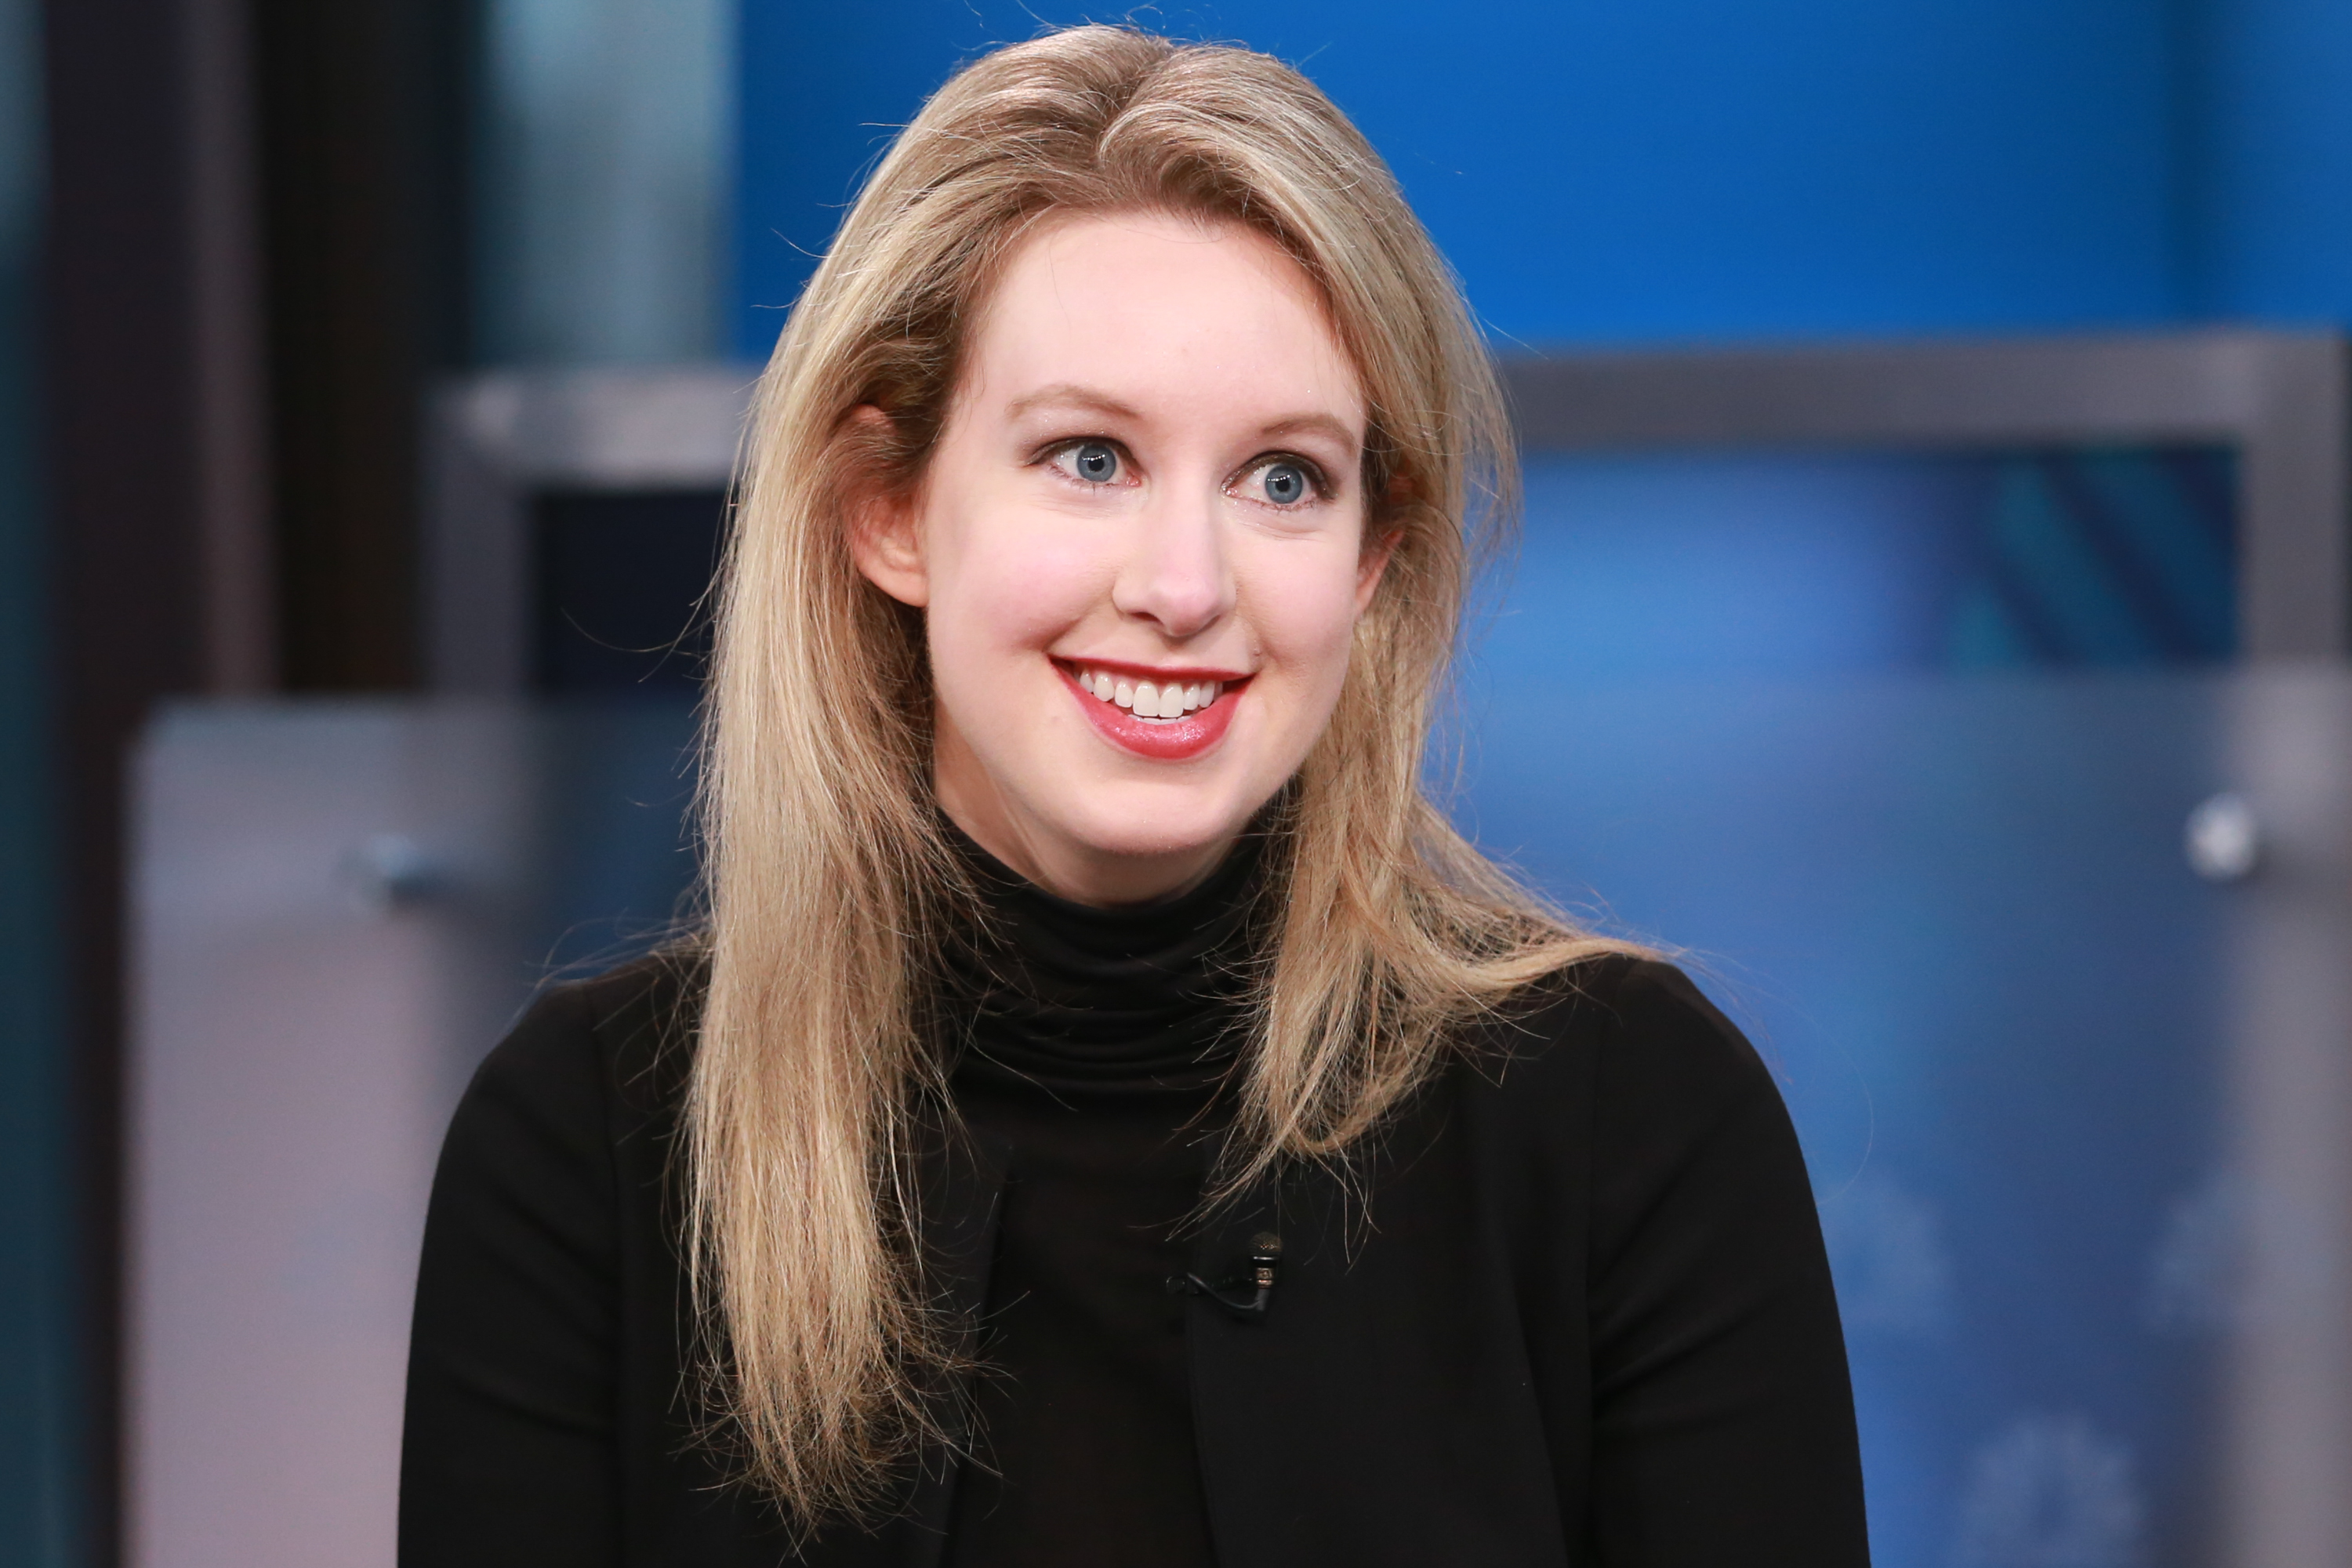 Theranos CEO Elizabeth Holmes in an interview on Sept. 29, 2015. (CNBC—NBC via Getty Images)